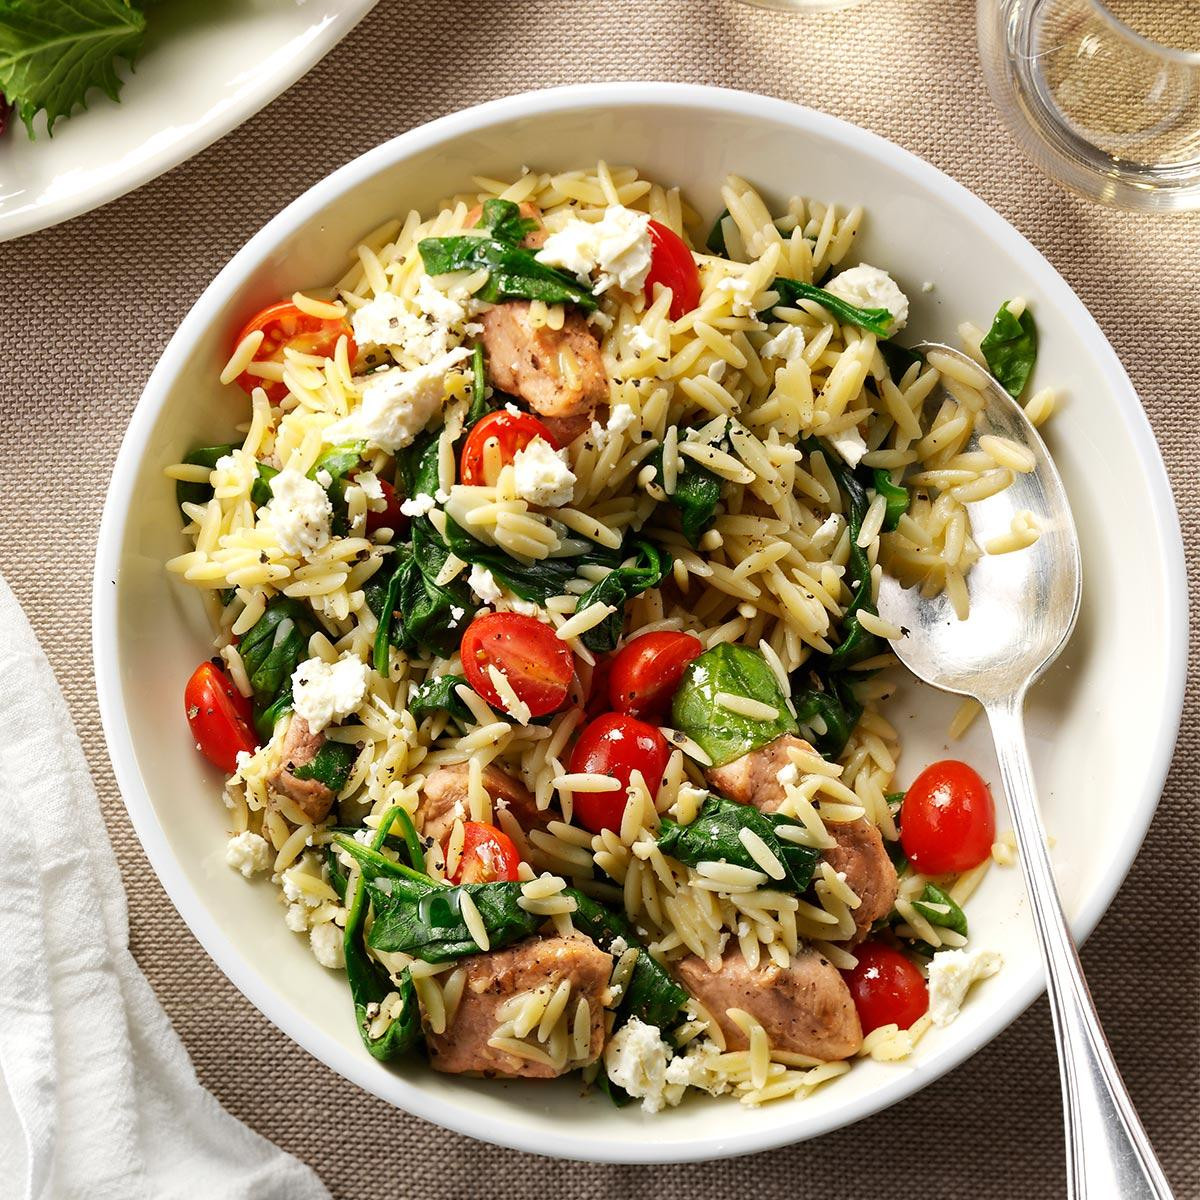 Healthy Dishes For Dinner
 Mediterranean Pork and Orzo Recipe